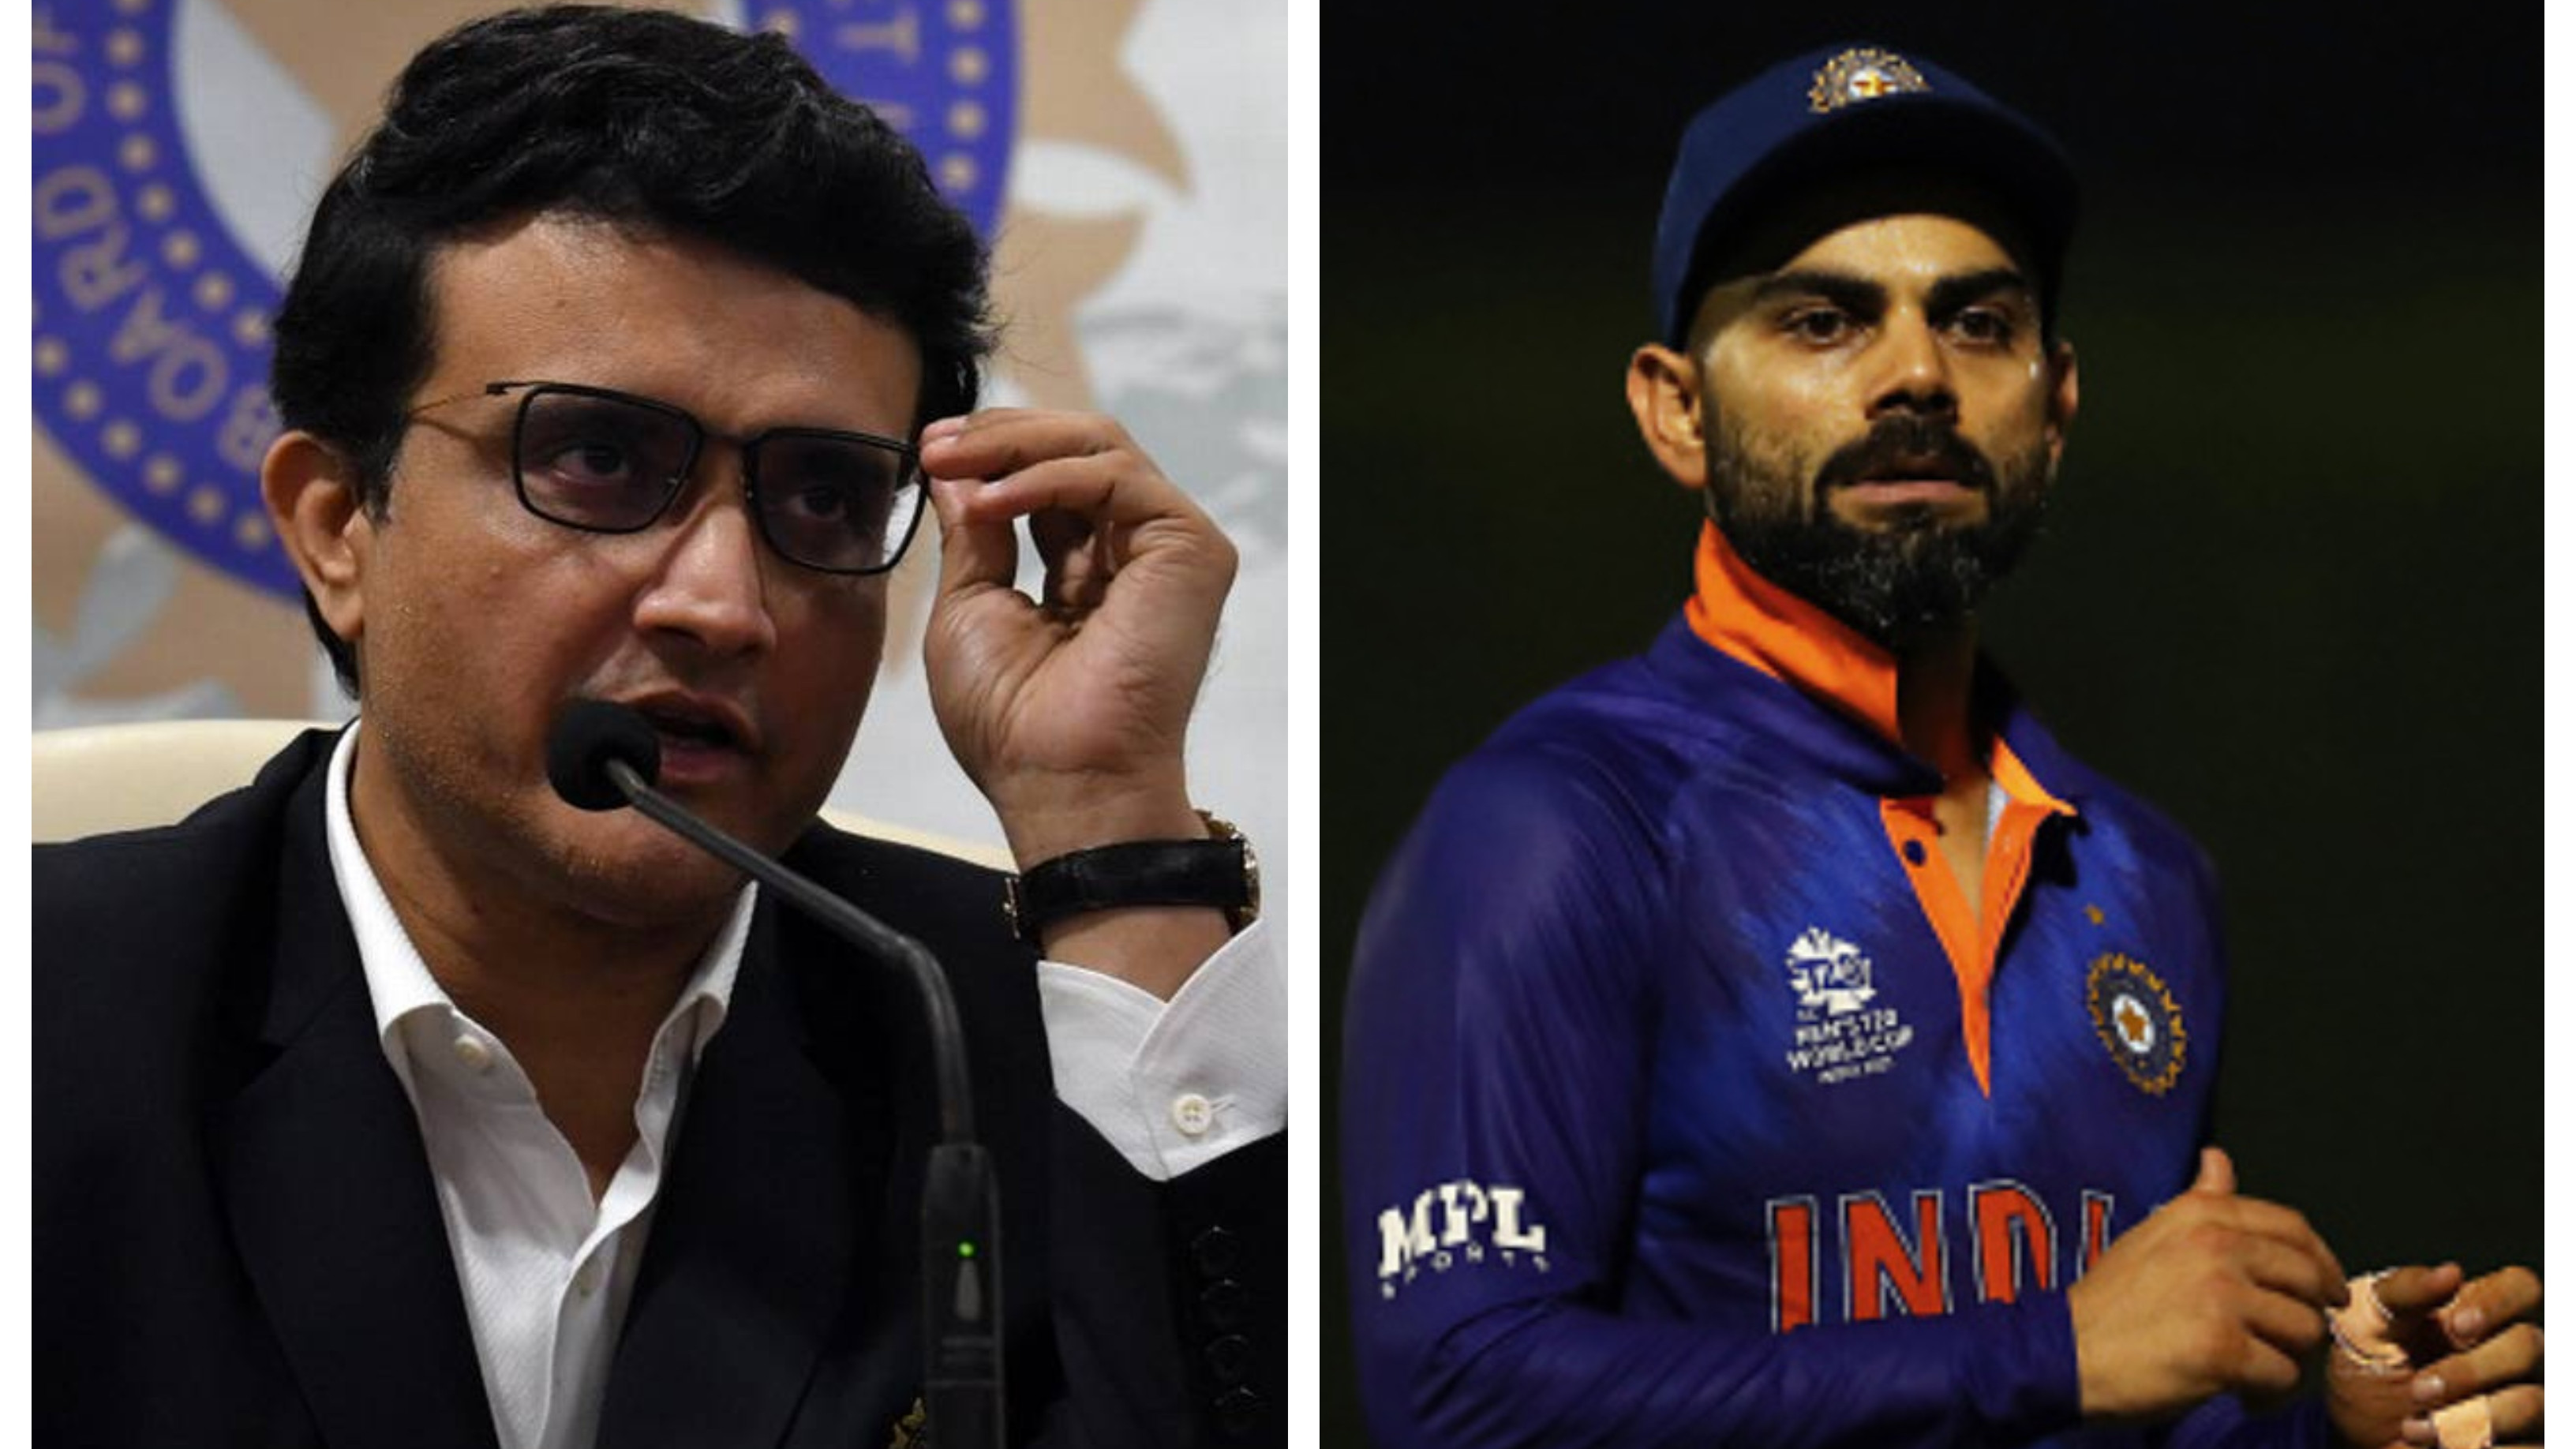 ‘BCCI and selectors took the call together’, Sourav Ganguly on Virat Kohli’s ouster as ODI captain